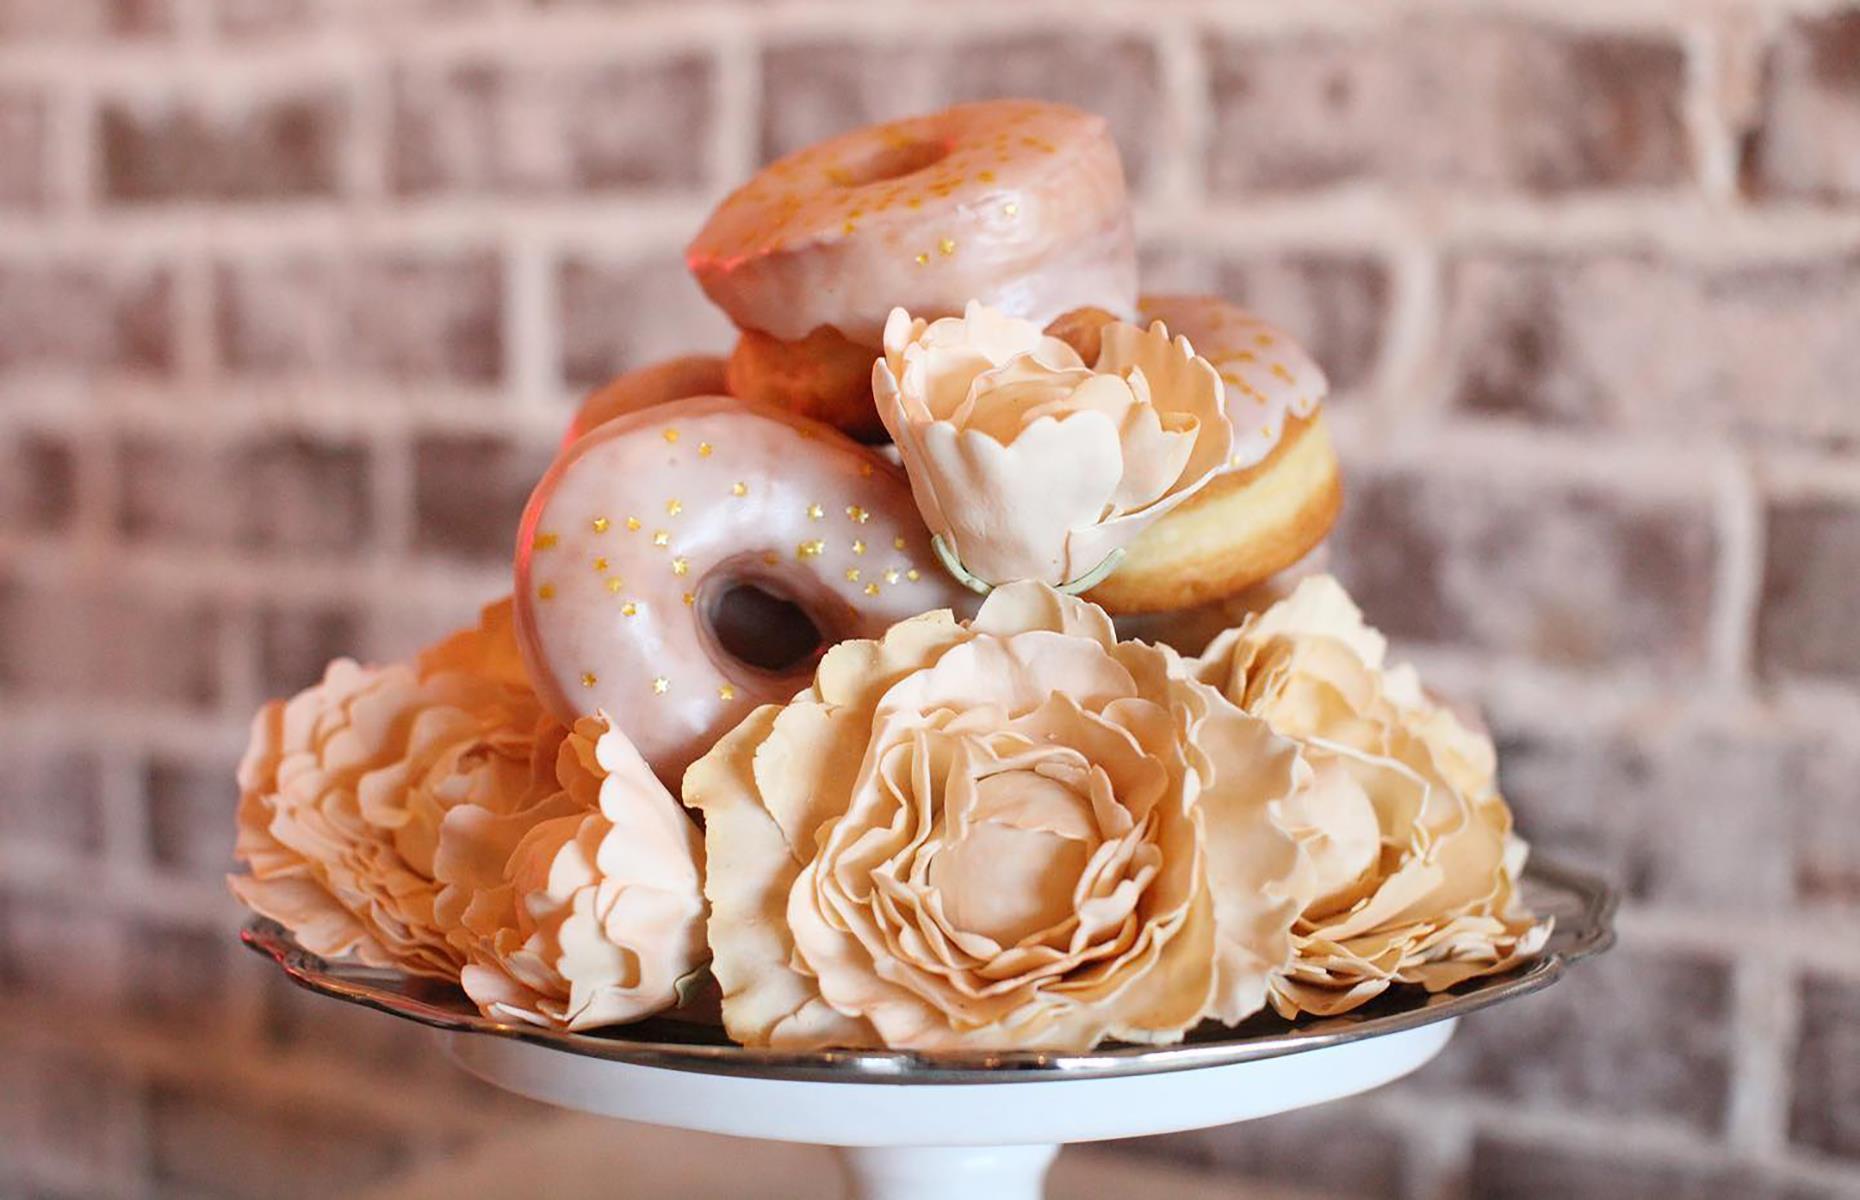 <p>Sometimes a glazed ring or sugar-dusted round doesn’t quite cut it. For those times, specialist bakeries and chains have risen to the occasion with some pretty outrageous donut creations. From innovative fillings to towering donut 'cakes,' these are some of the most outrageous donut flavors across the country.</p>